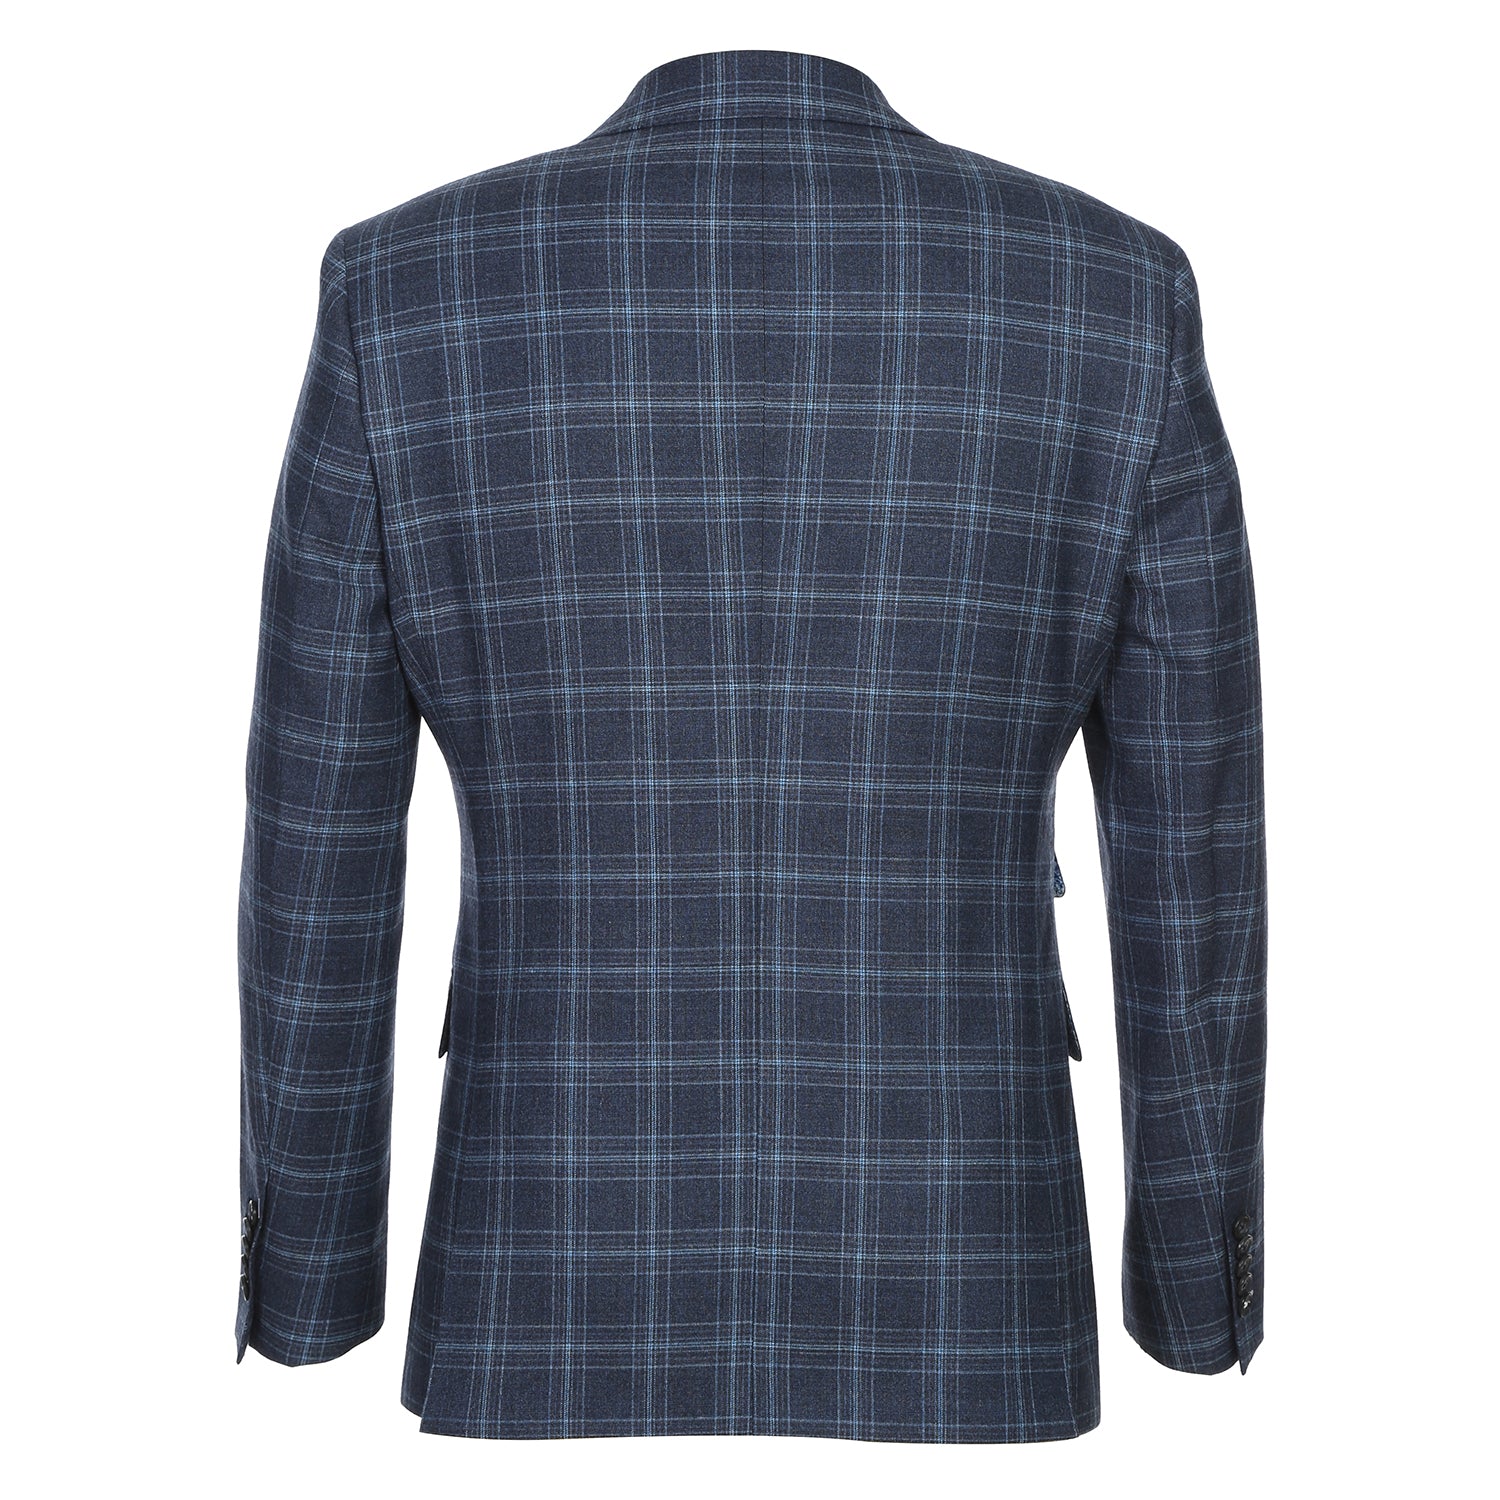 English Laundry Double-Breasted Mineral Blue Check Wool Blend Suit 3